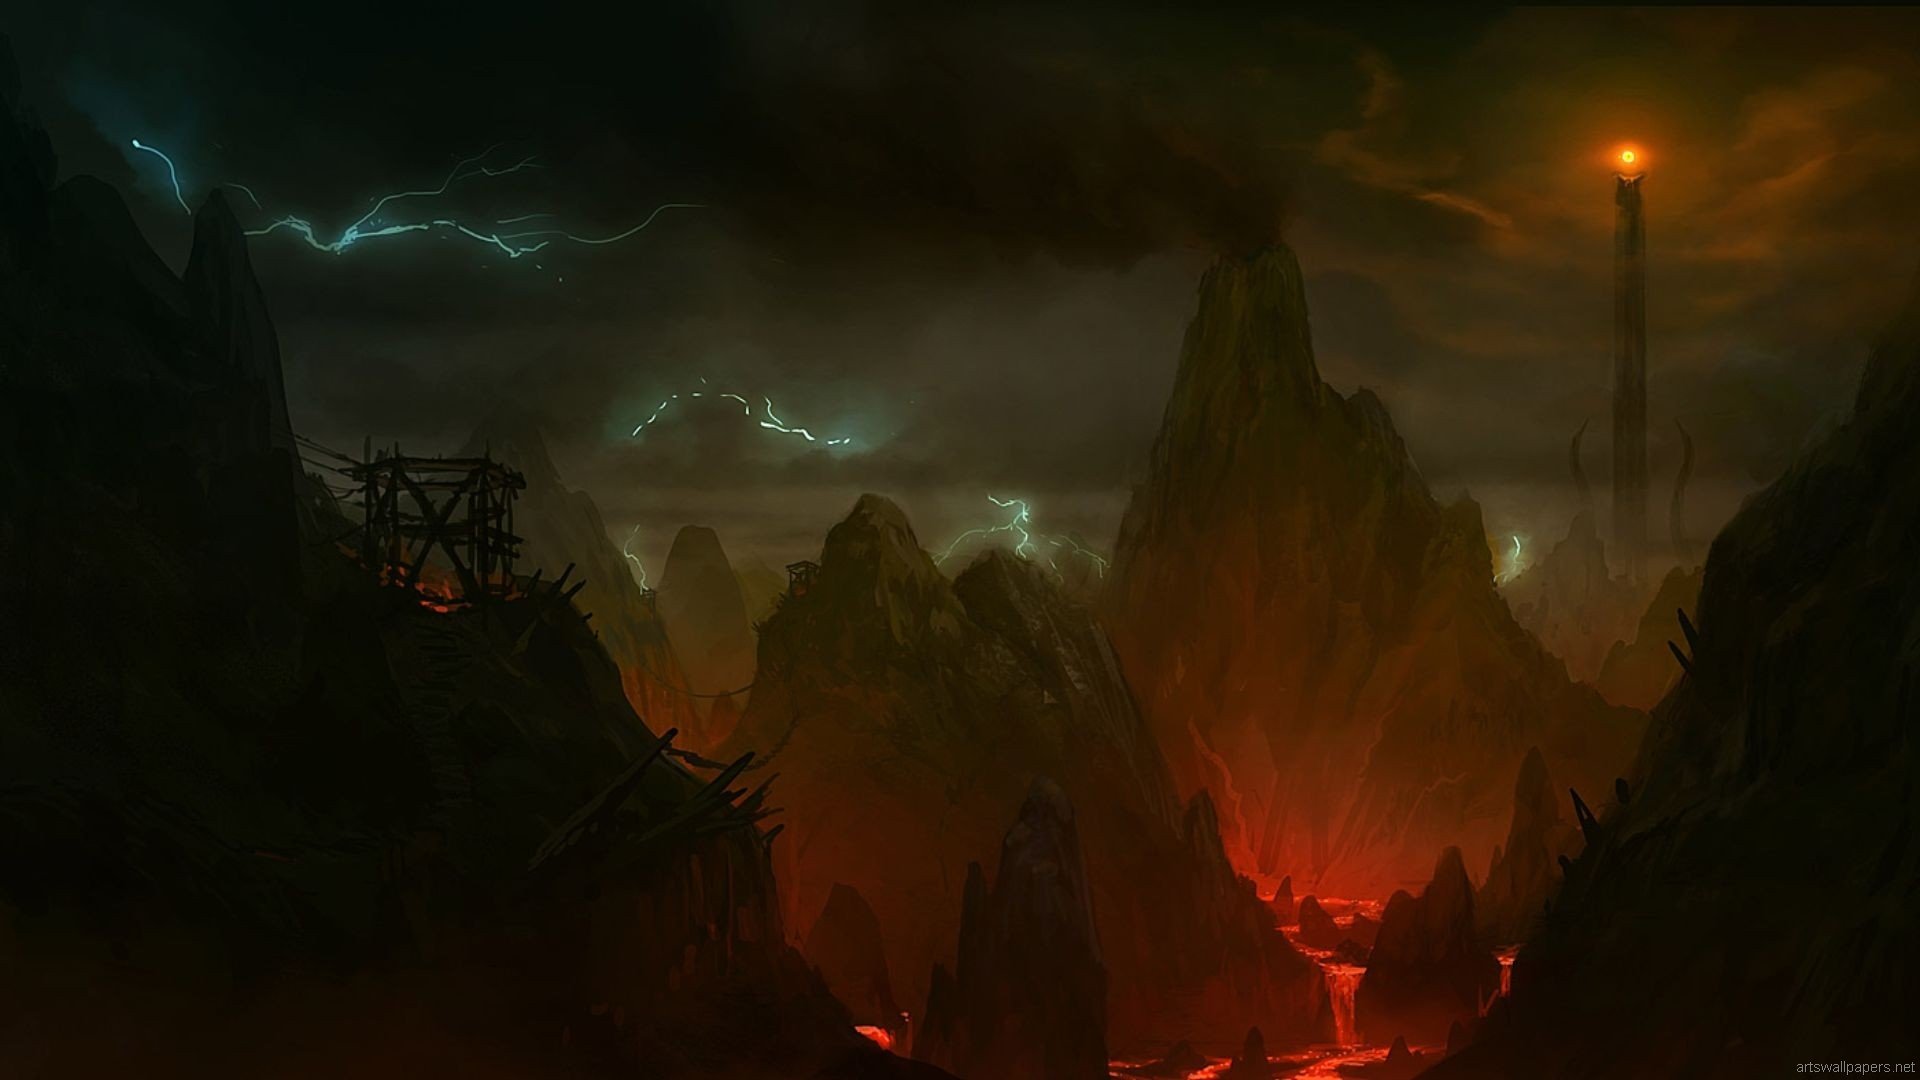 lava, Sauron, The, Lord, Of, The, Rings, Fantasy, Art, Mordor, Artwork, Middle earth, Fictional, Landscapes, Barad, Dur Wallpaper